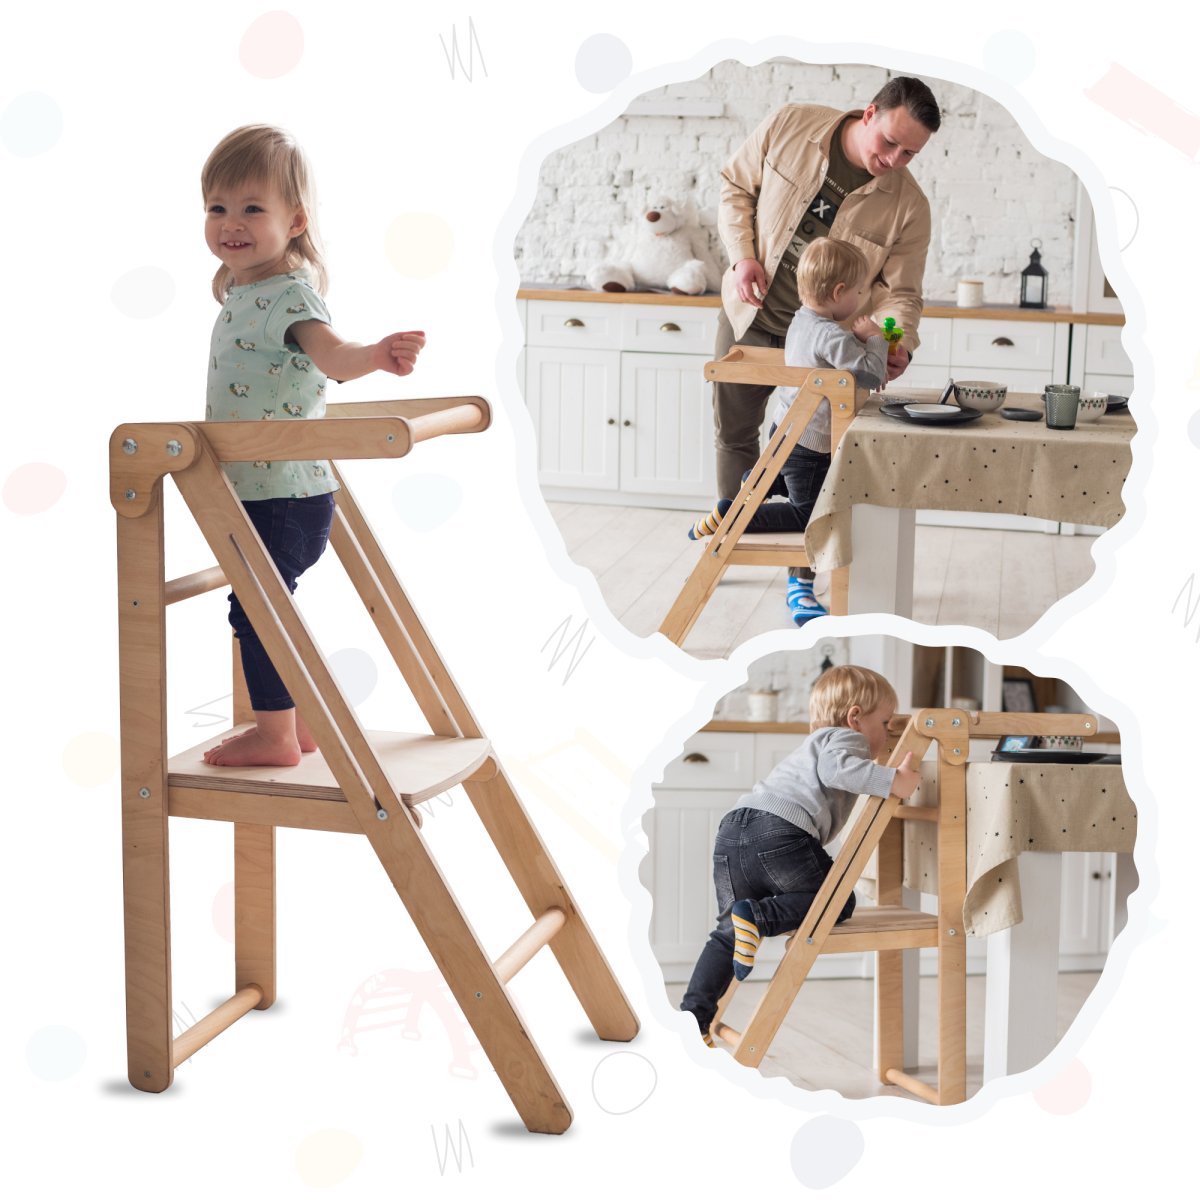 Wooden Step Stool for Preschool - Kid Chair That Grows - Chocolate